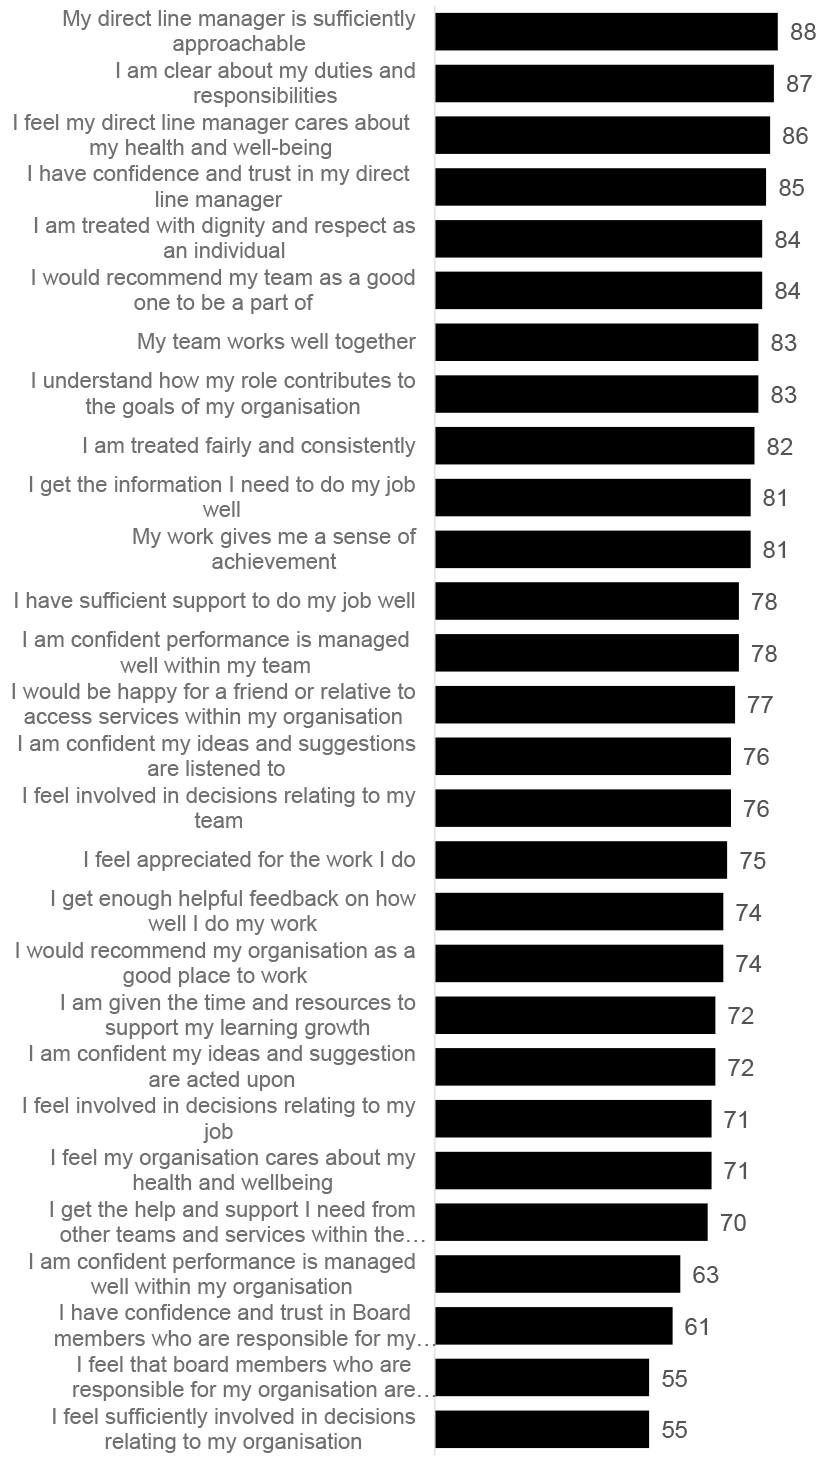 Bar chart showing survey components ranked from highest; 88 for line manager being sufficiently approachable; to lowest; 55 for feeling sufficiently involved in decisions relating to my organisation.